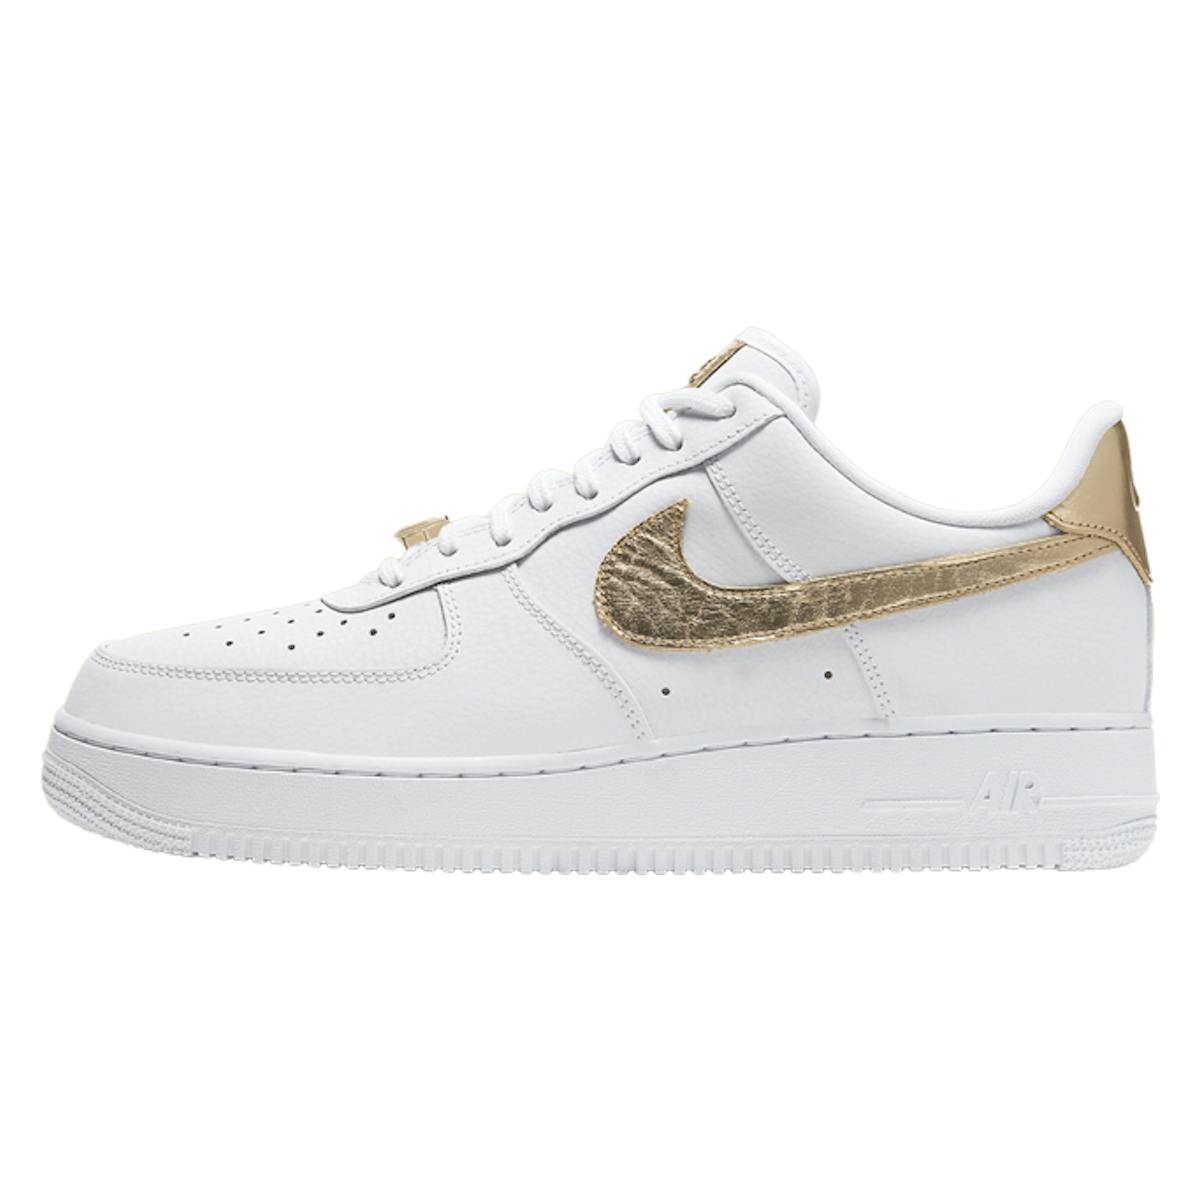 Nike Air Force 1 Low "White Gold"